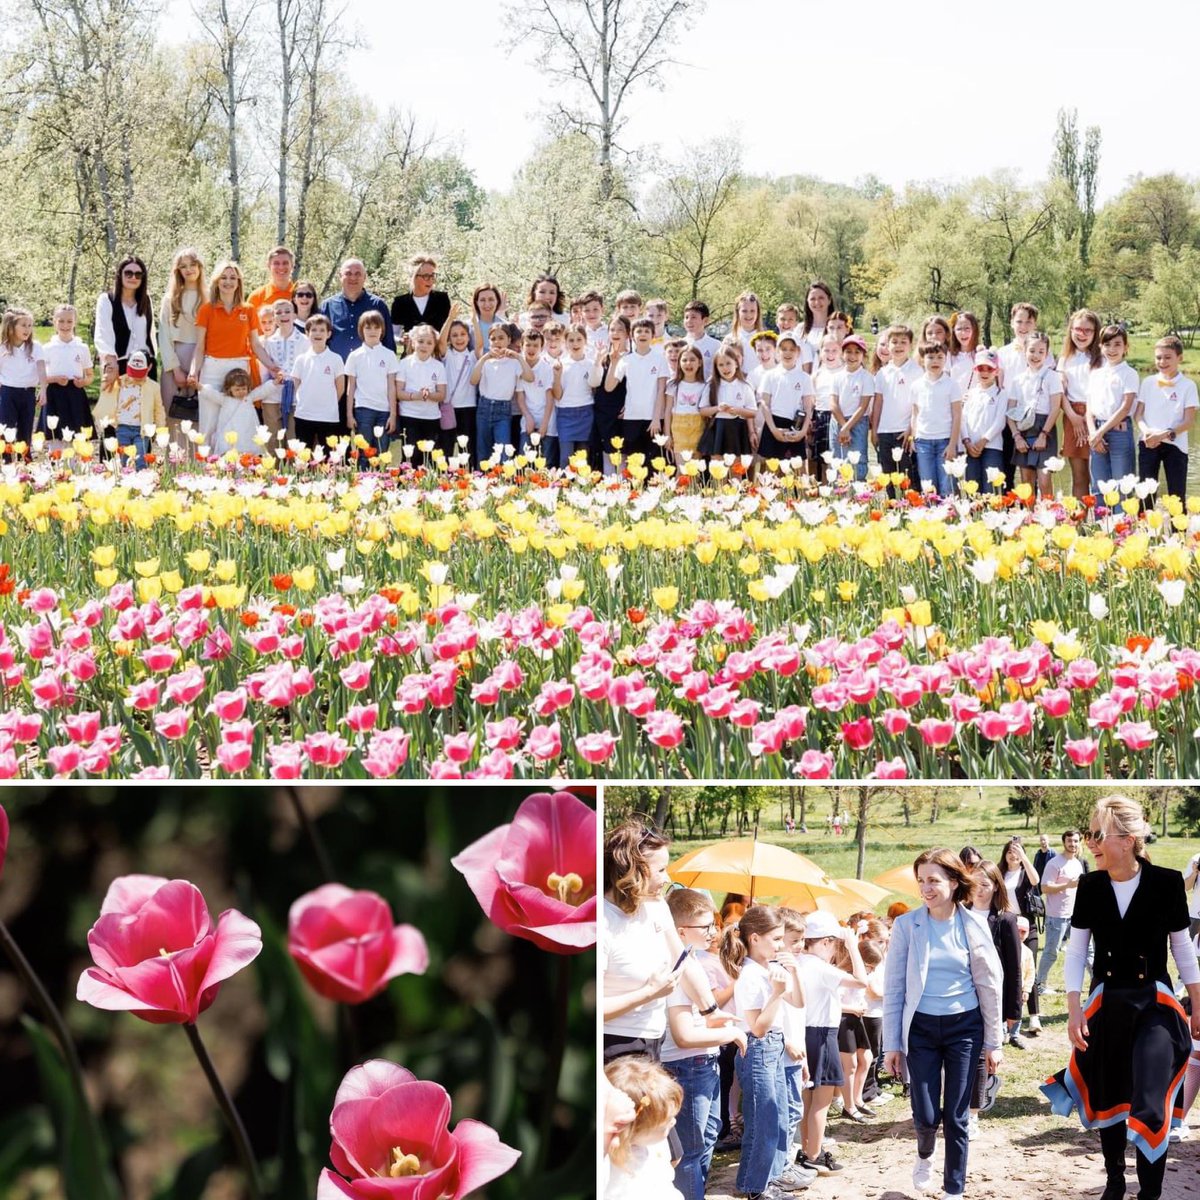 Our Tulip Island was officially inaugurated by President Maia Sandu today. A symbol of growing 🇳🇱🇲🇩 relations and a colourful treasure open to enjoy by all in the beautiful Botanical Gardens of Chisinău.